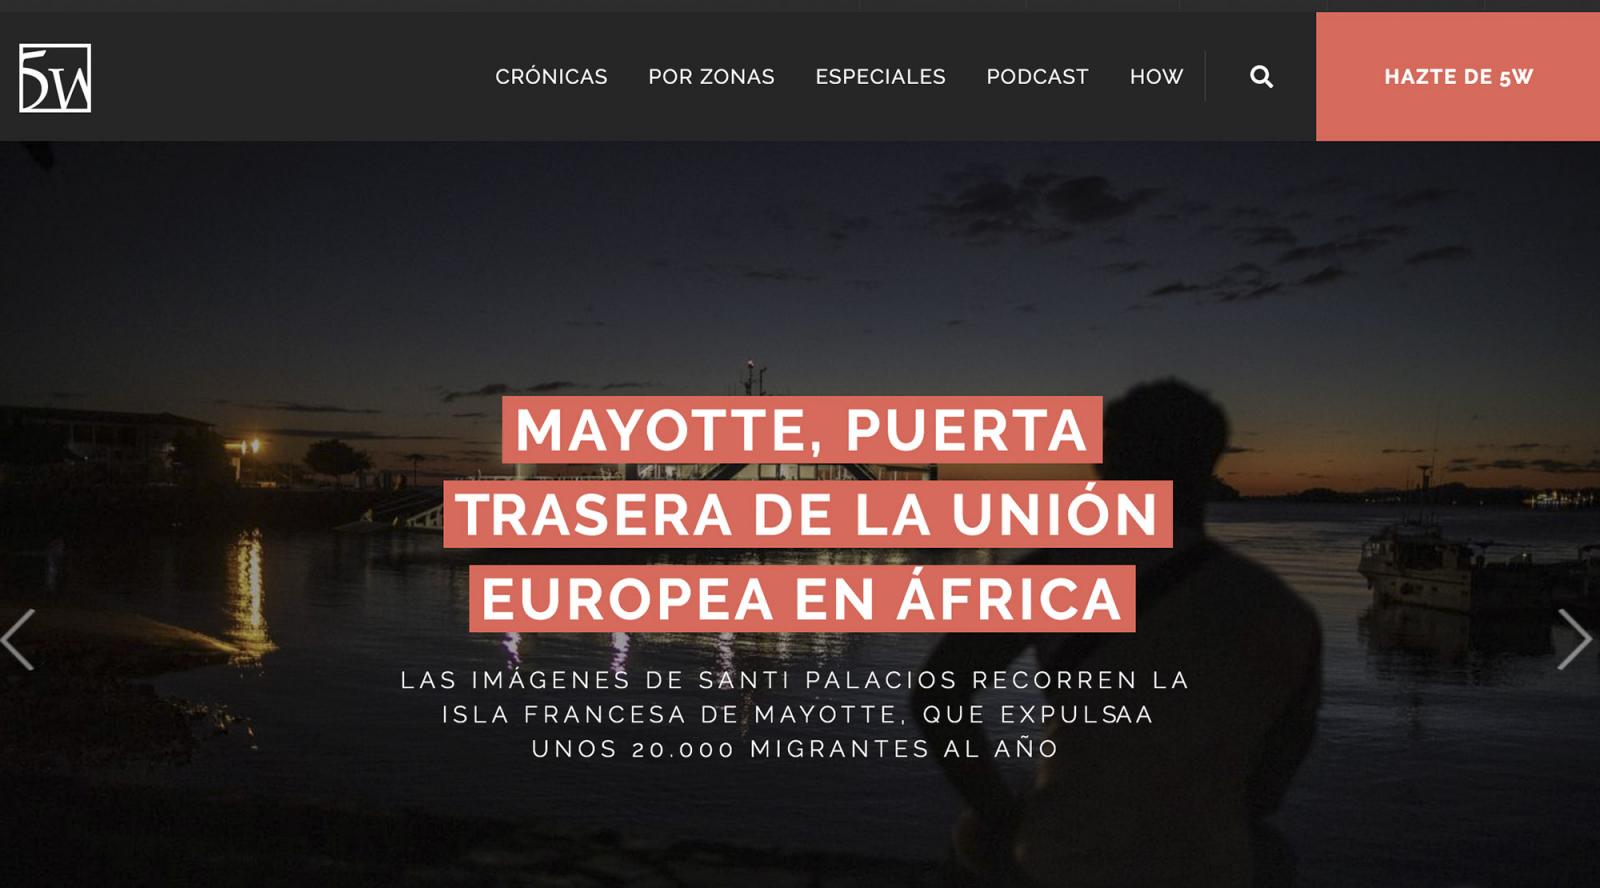 Thumbnail of Story on the migratory route tha_ by Revista 5W. Follow the link 